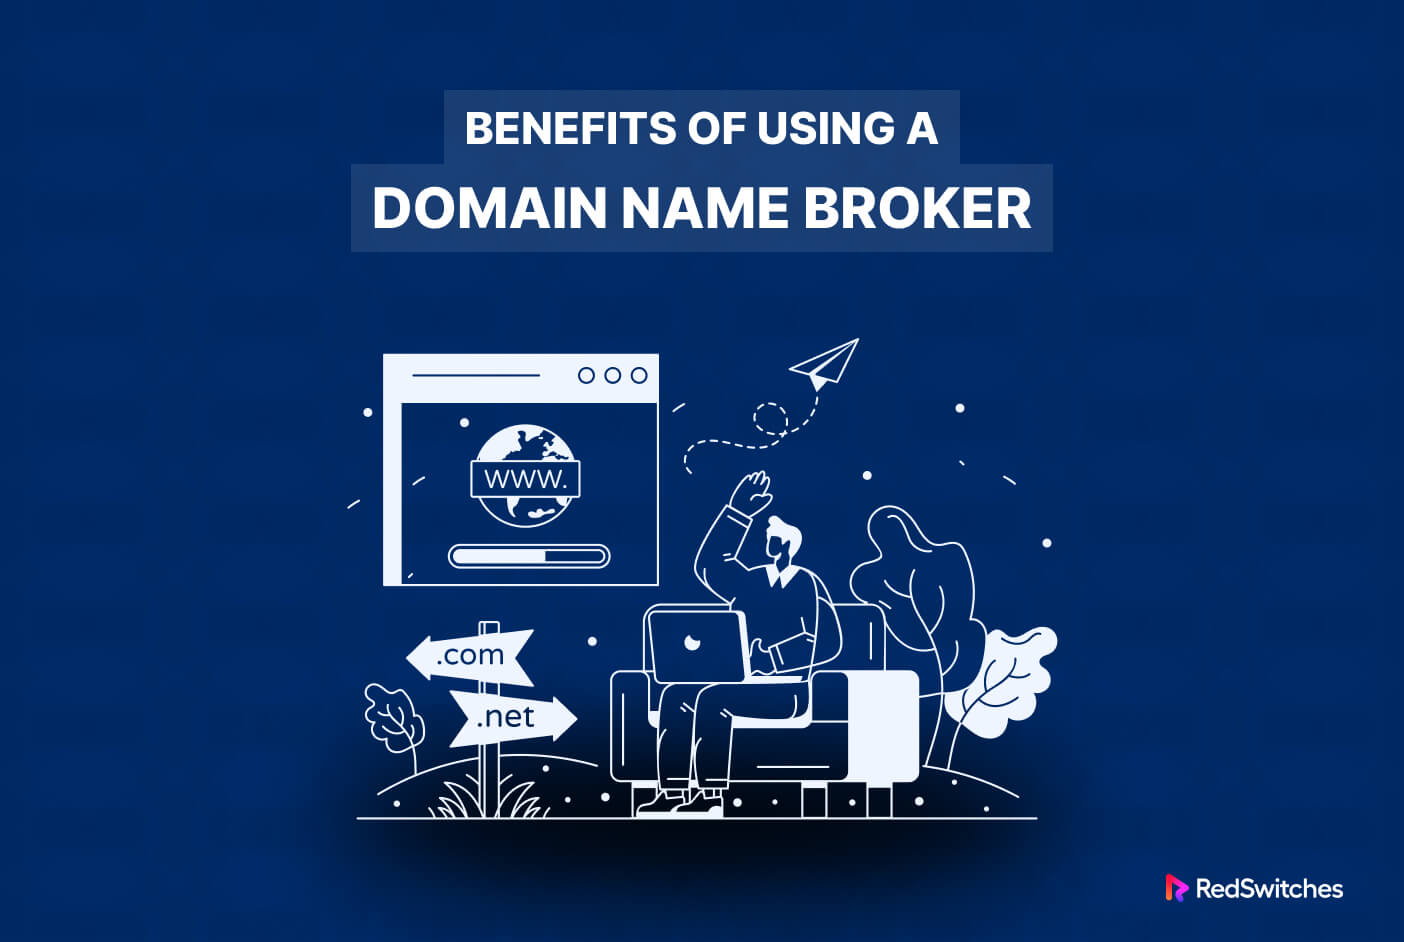 Benefits of using a domain name broker